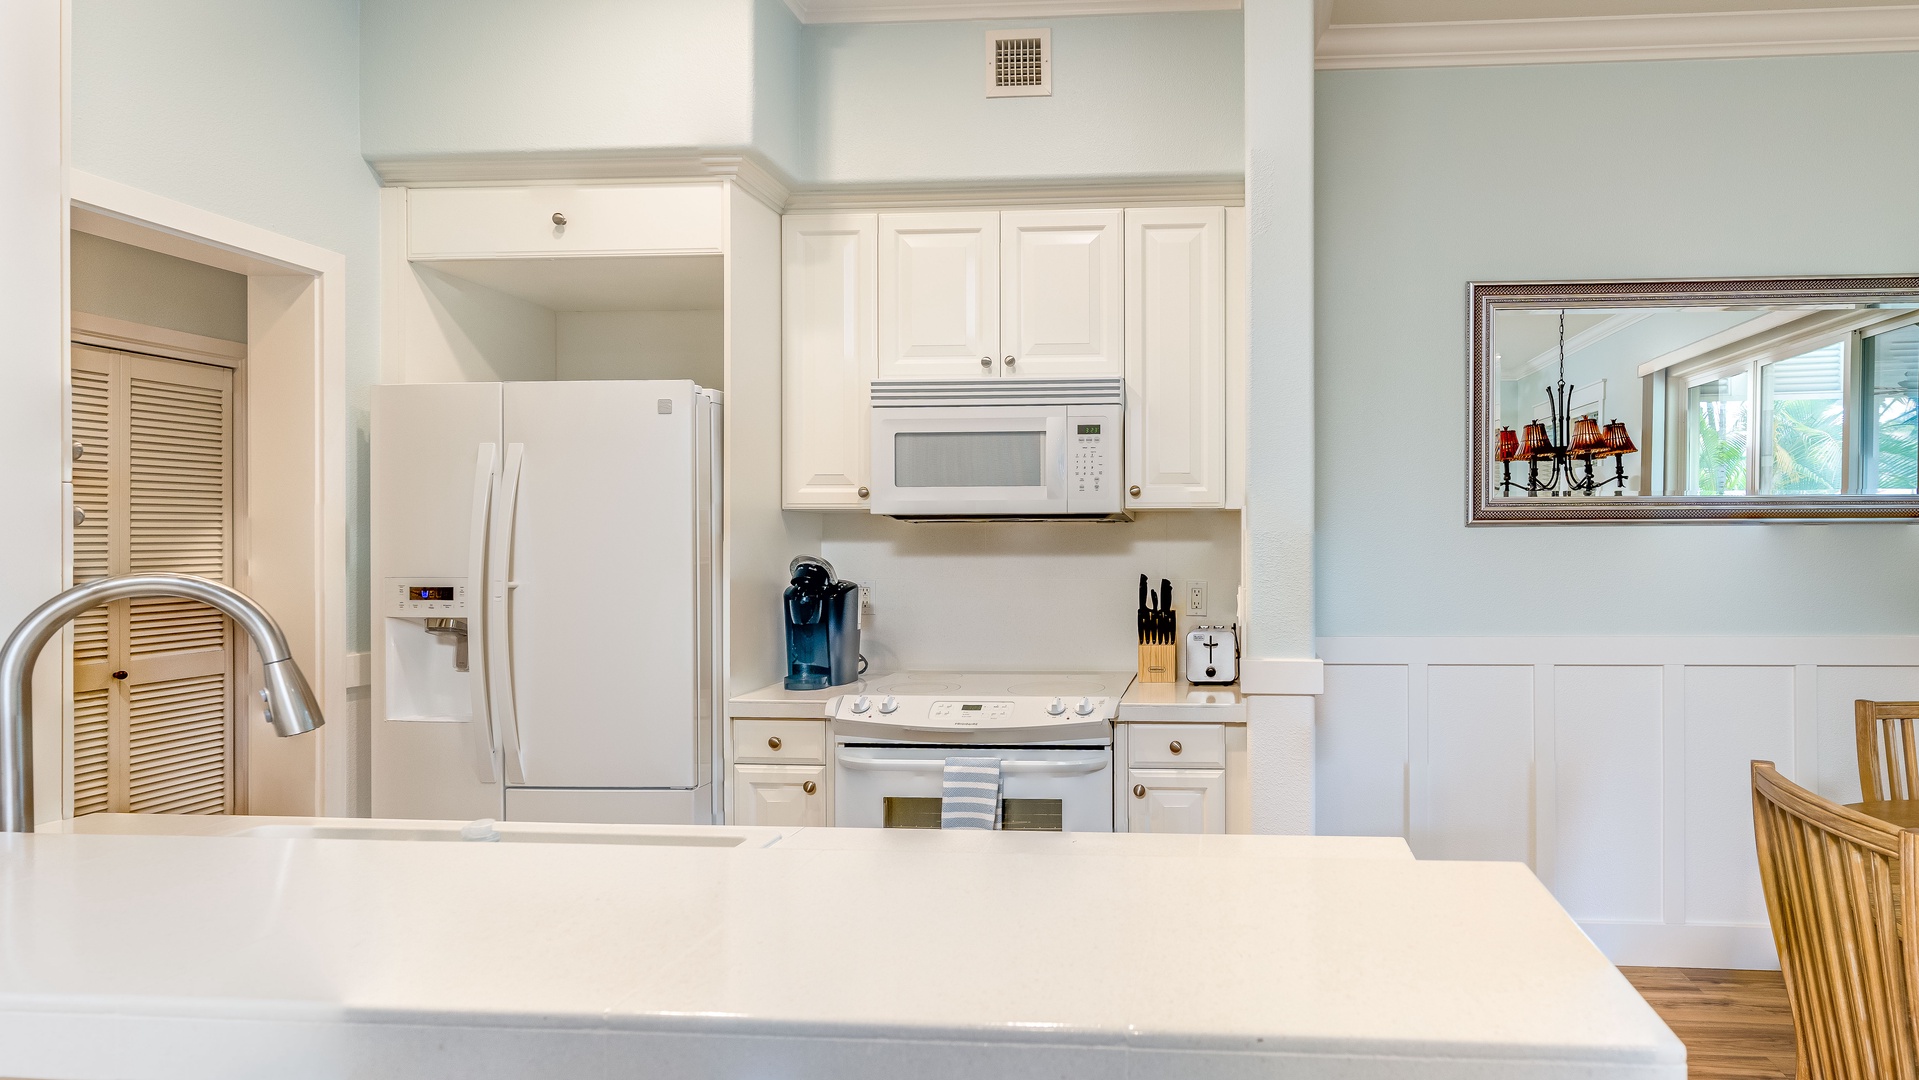 Kapolei Vacation Rentals, Coconut Plantation 1110-3 - The bright kitchen features many amenities including a fridge, oven, extended counter-tops and high ceilings.